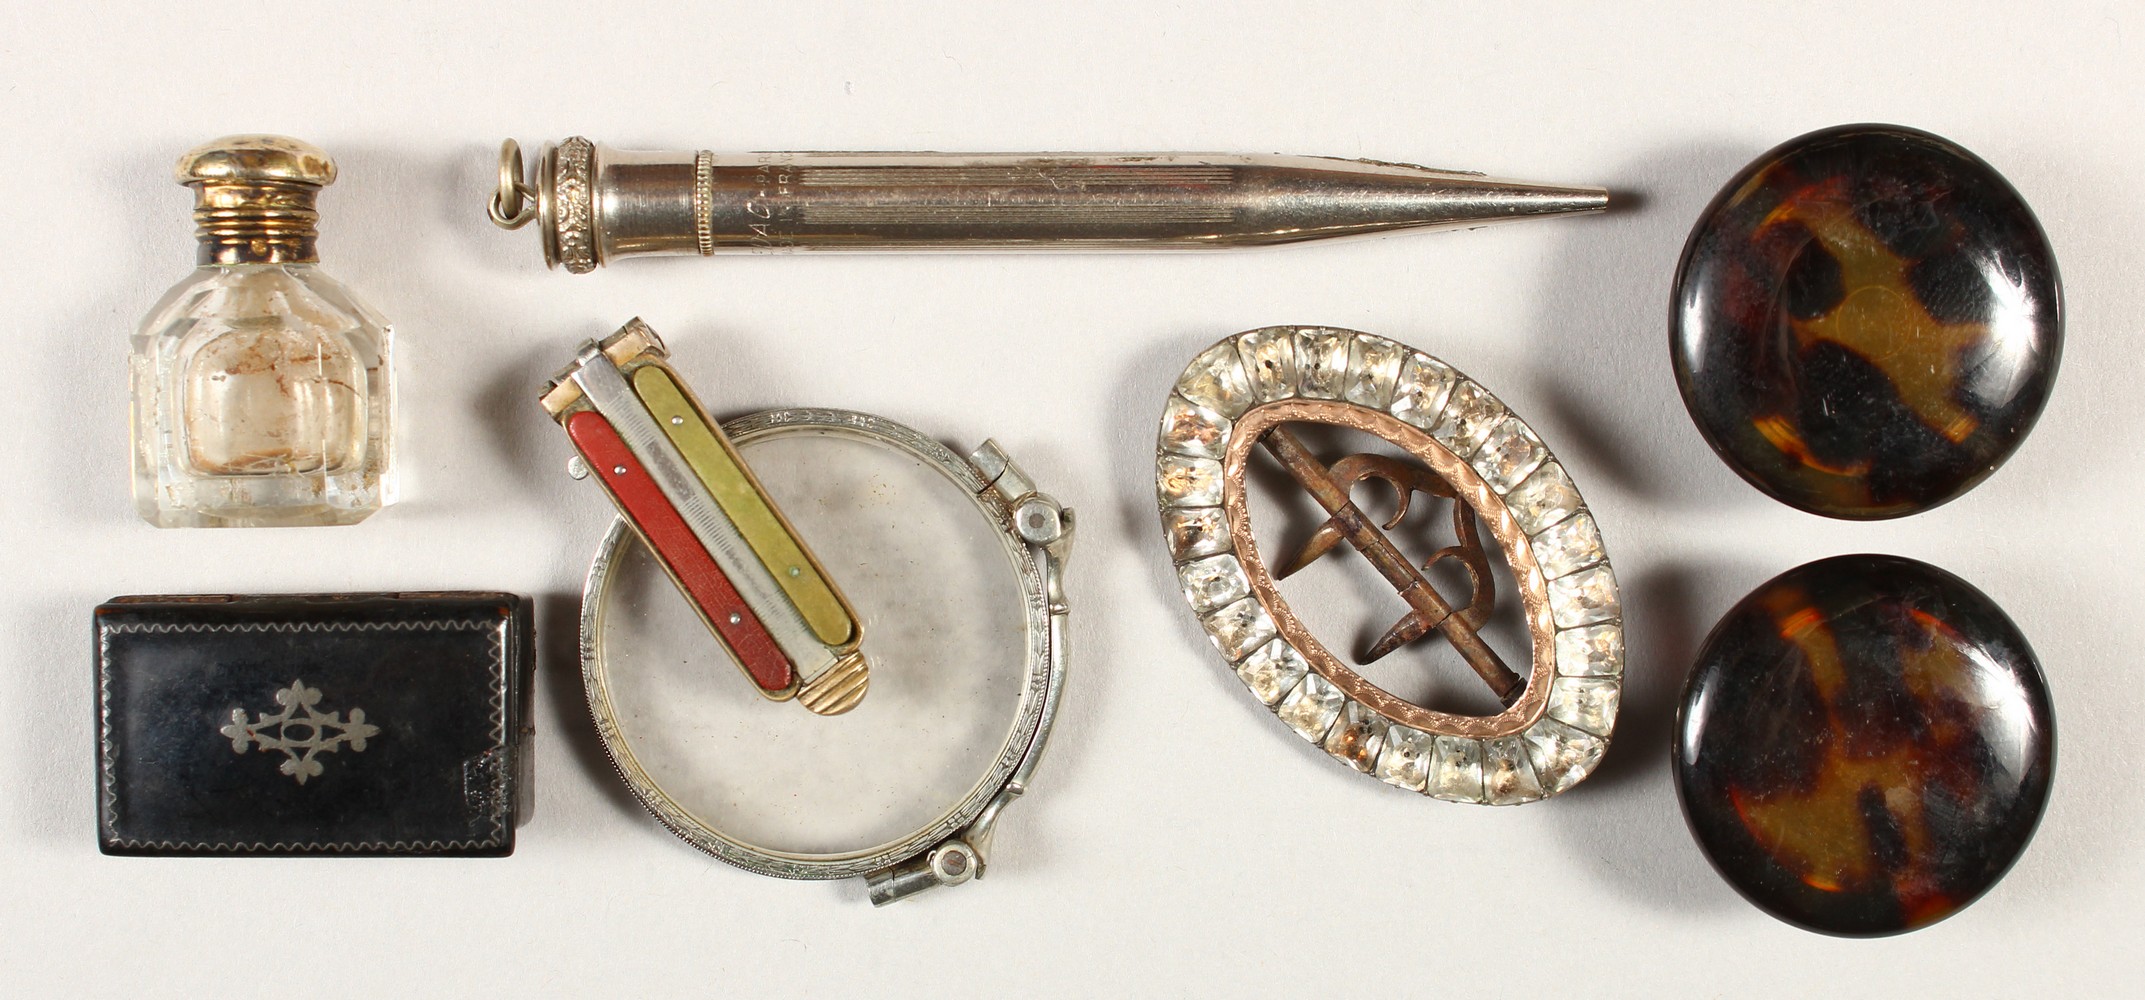 A SMALL SCENT BOTTLE, SNUFF BOX, two tortoiseshell boxes, lorgnette, brooch and pencil.